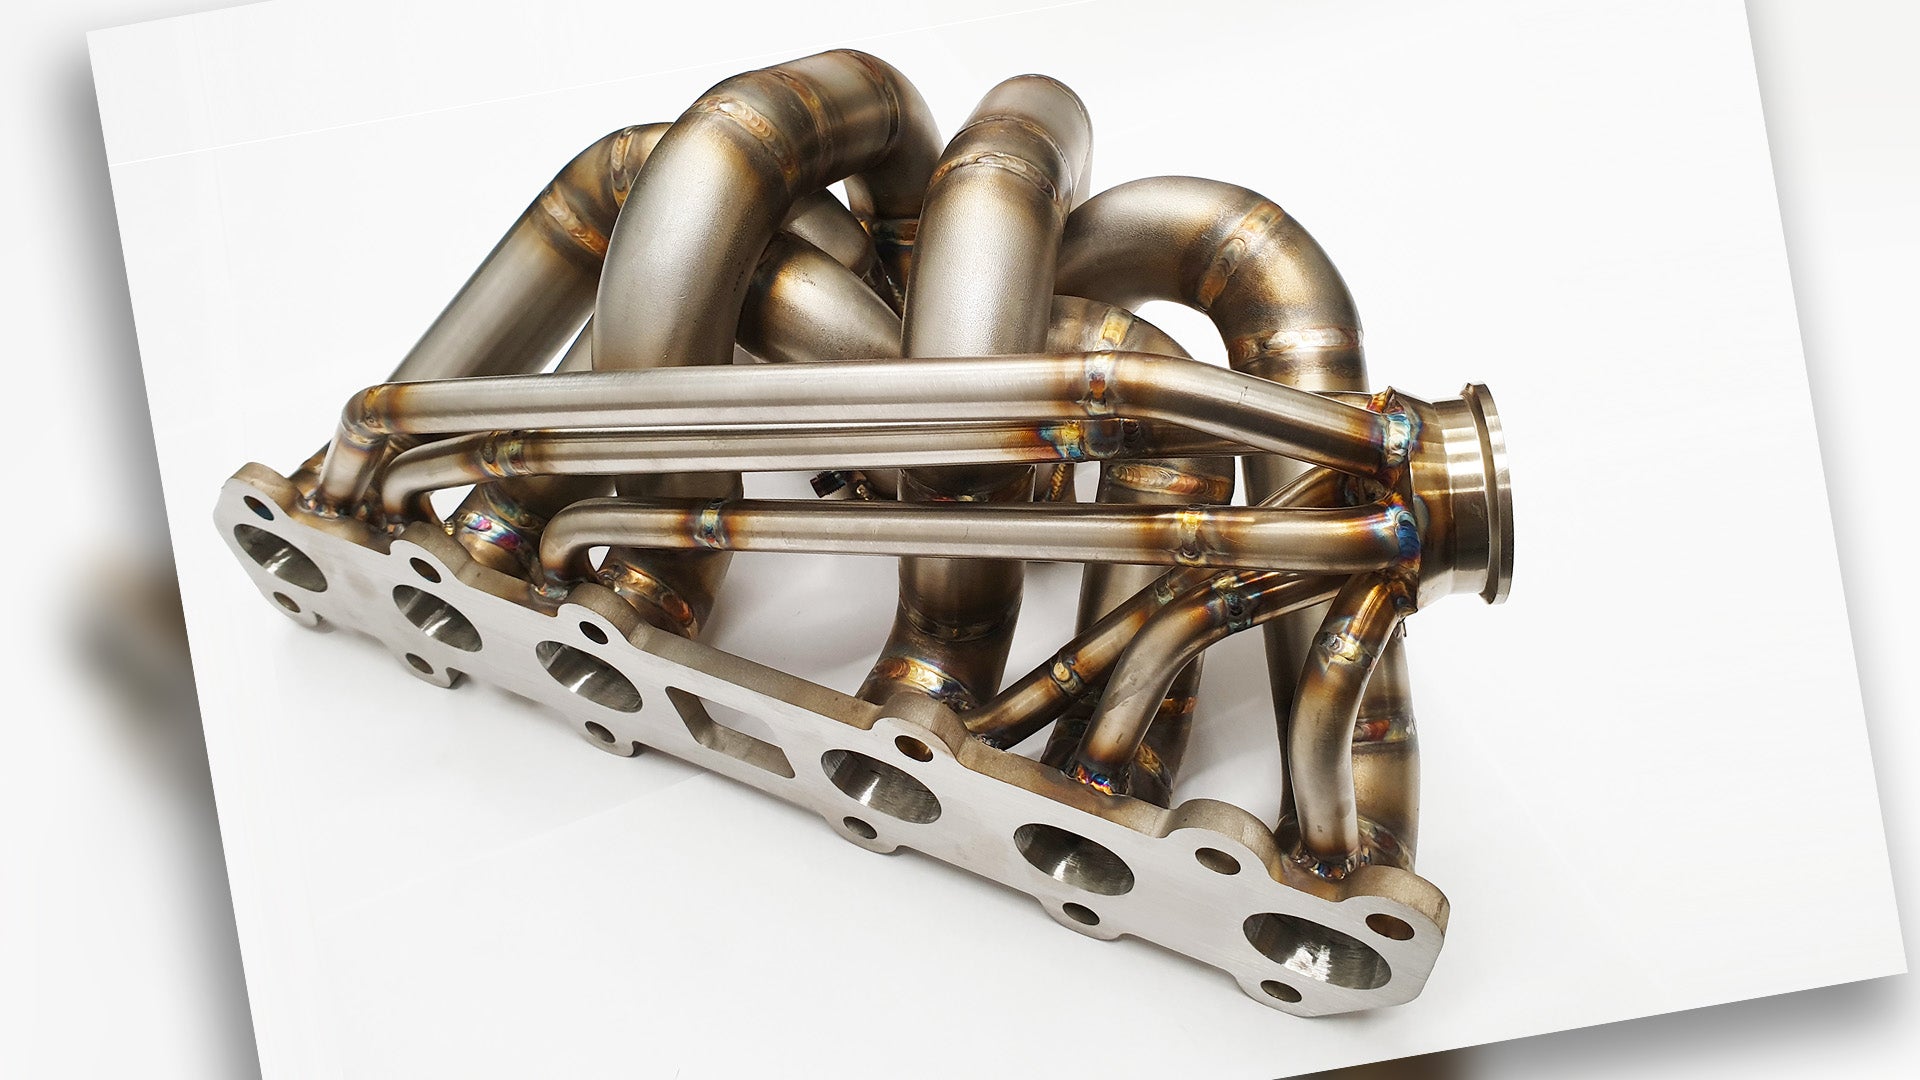 This 2JZ exhaust manifold utilizes EGR in reverse for anti-lag functionality.